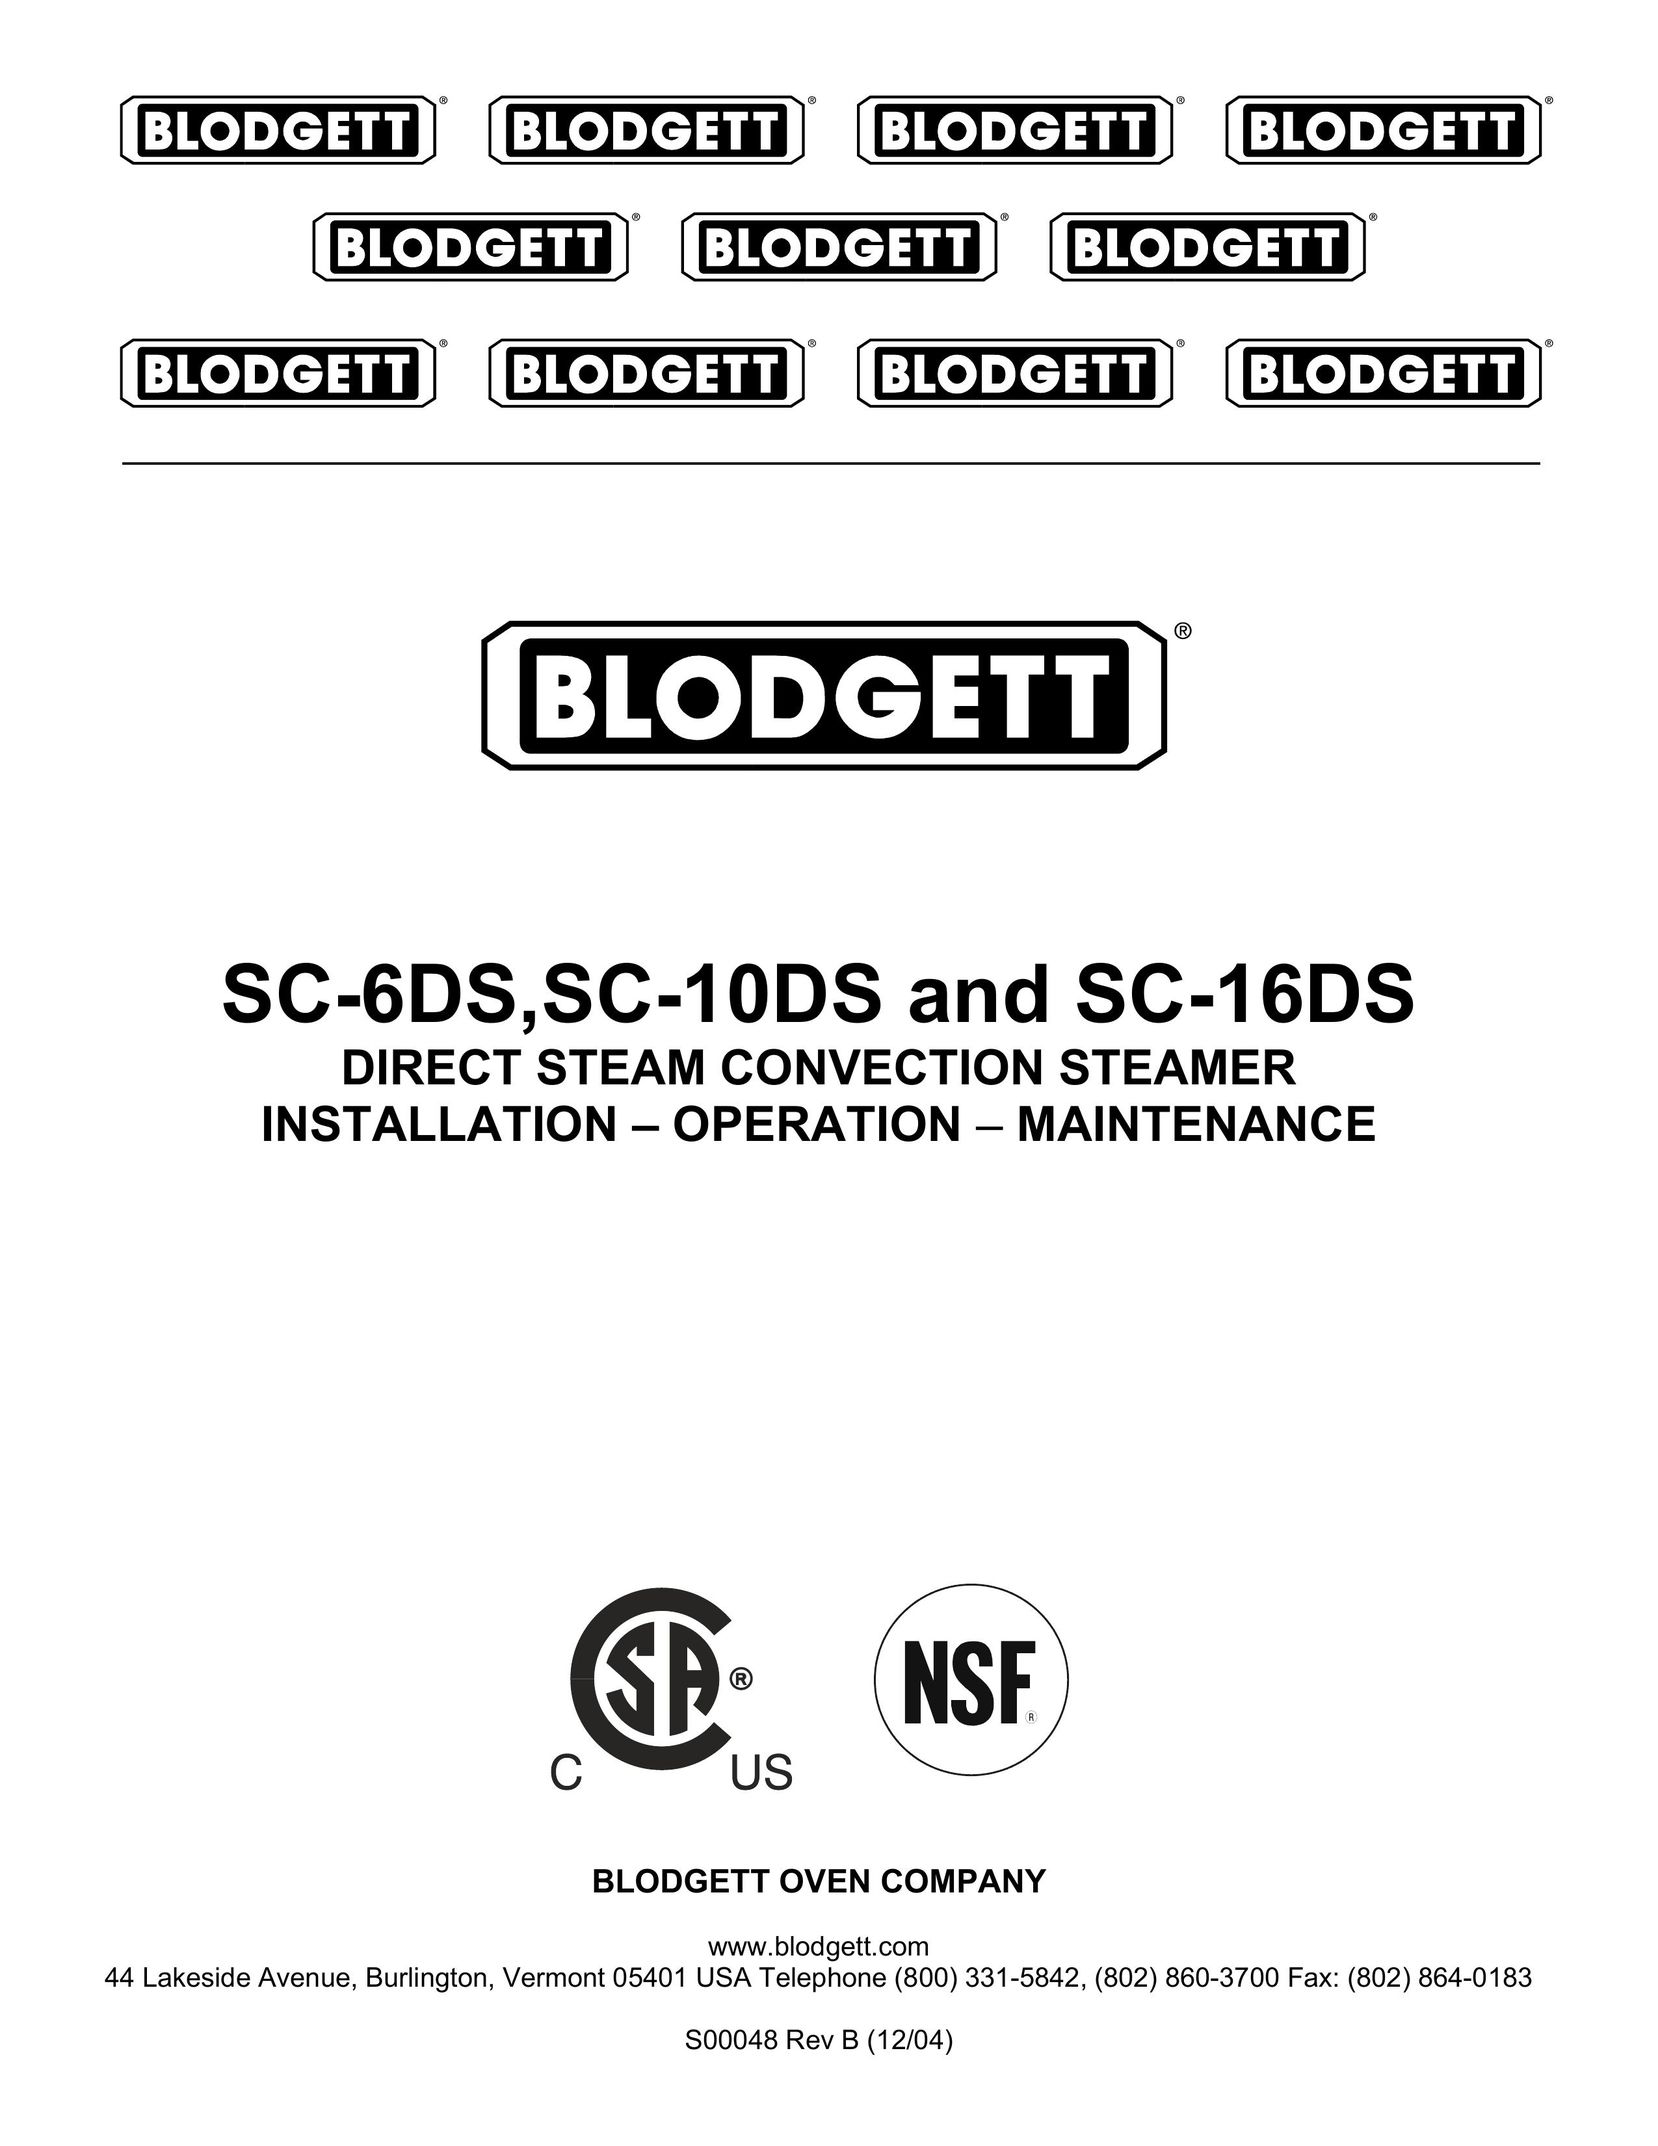 Blodgett SC-16DS Convection Oven User Manual